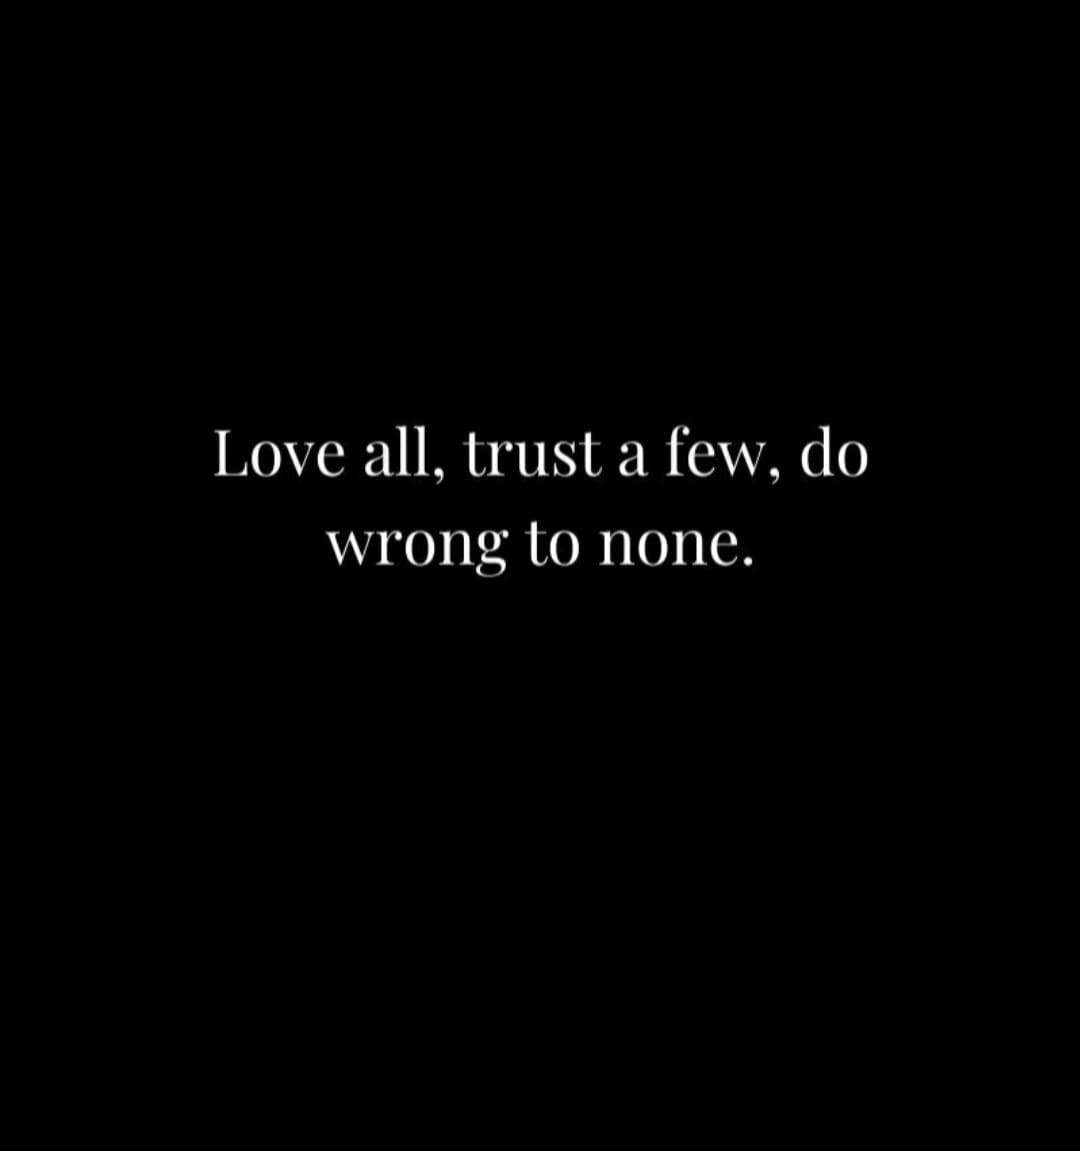 love all, trust a few, do wrong to no one